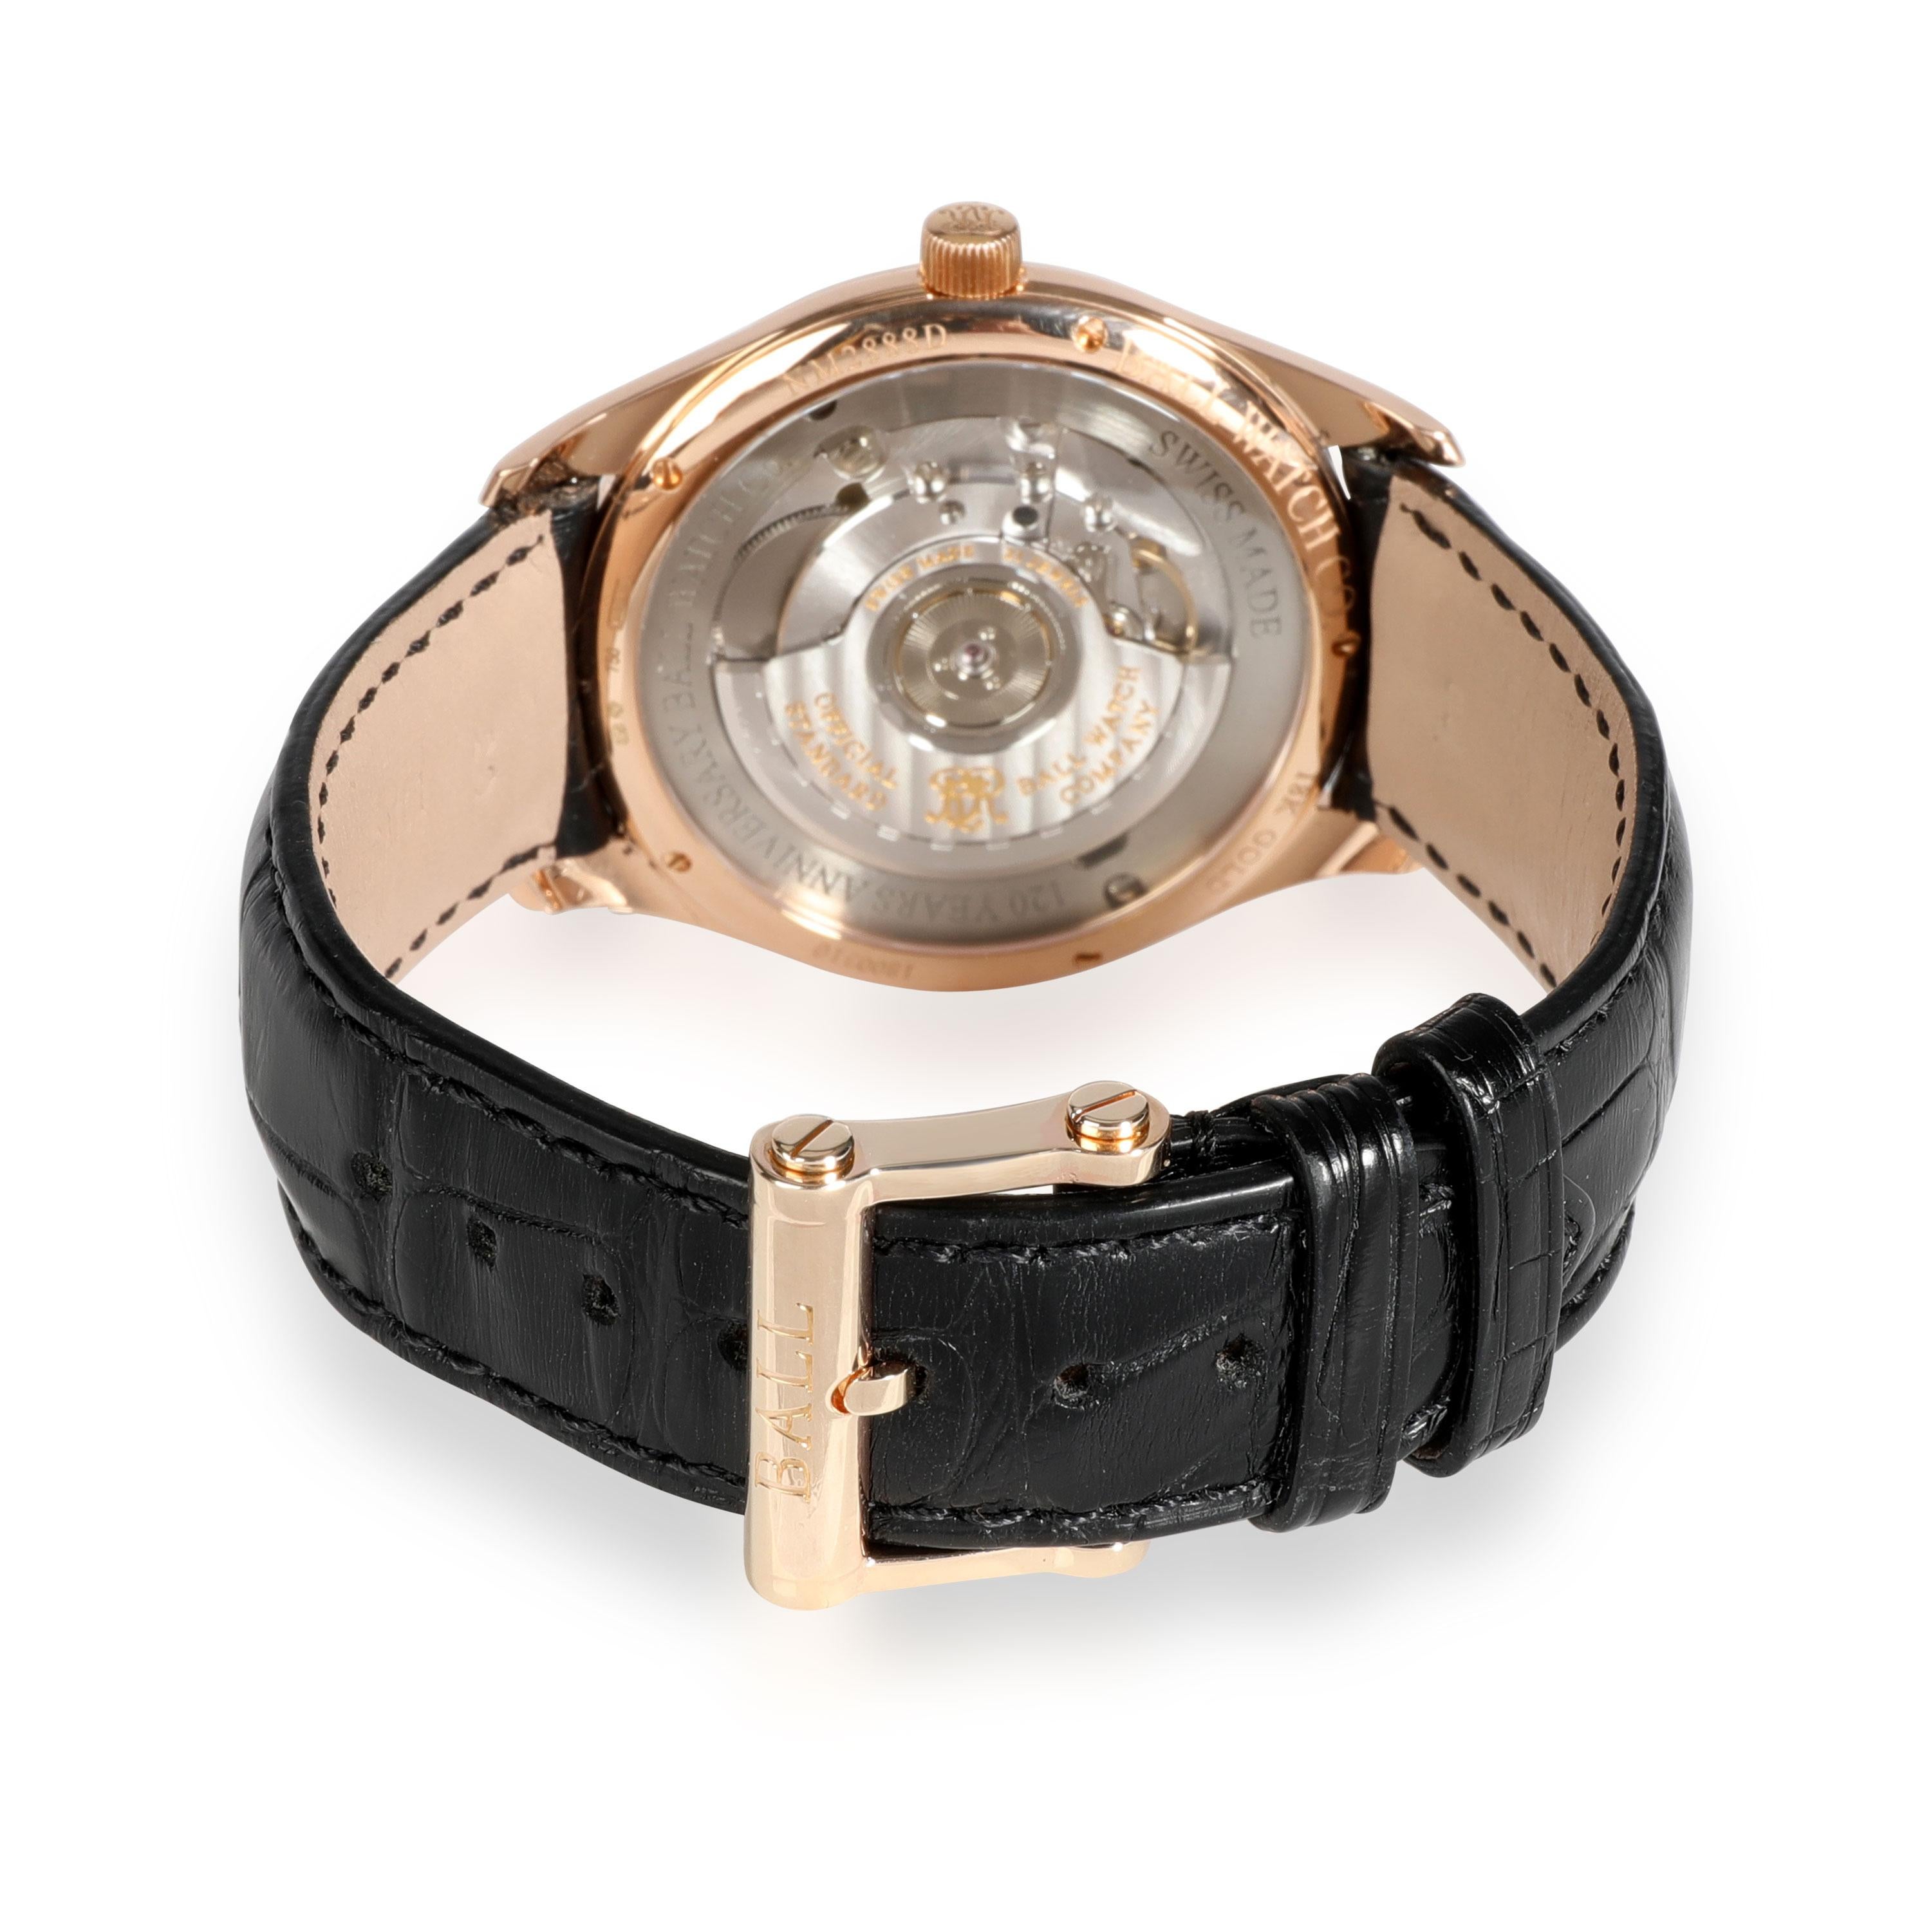 Ball Trainmaster 120 NM2888D Men's Watch in 18kt Rose Gold

SKU: 109928

PRIMARY DETAILS
Brand:  Ball
Model: Trainmaster 120
Country of Origin: Switzerland
Movement Type: Mechanical: Automatic/Kinetic
Year Manufactured: 
Year of Manufacture: